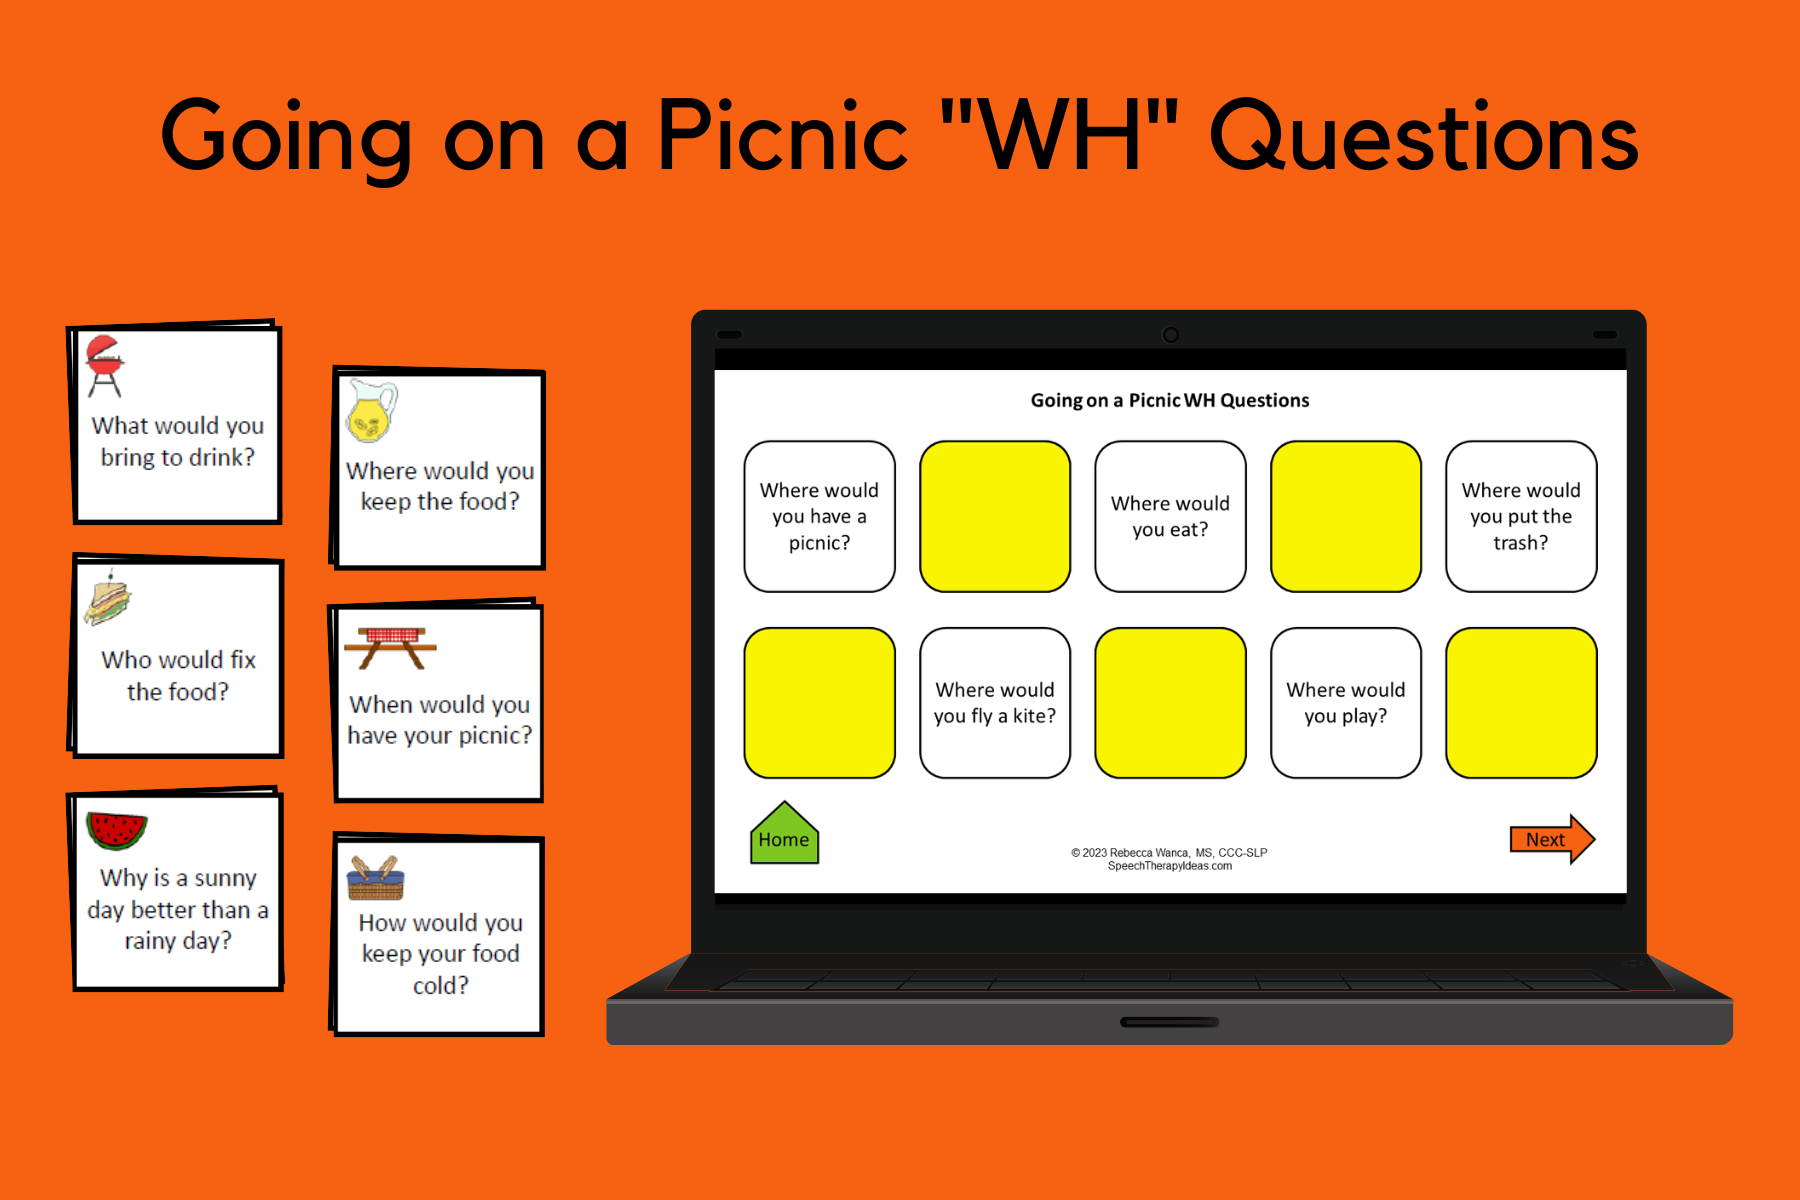 Going on a Picnic WH Questions